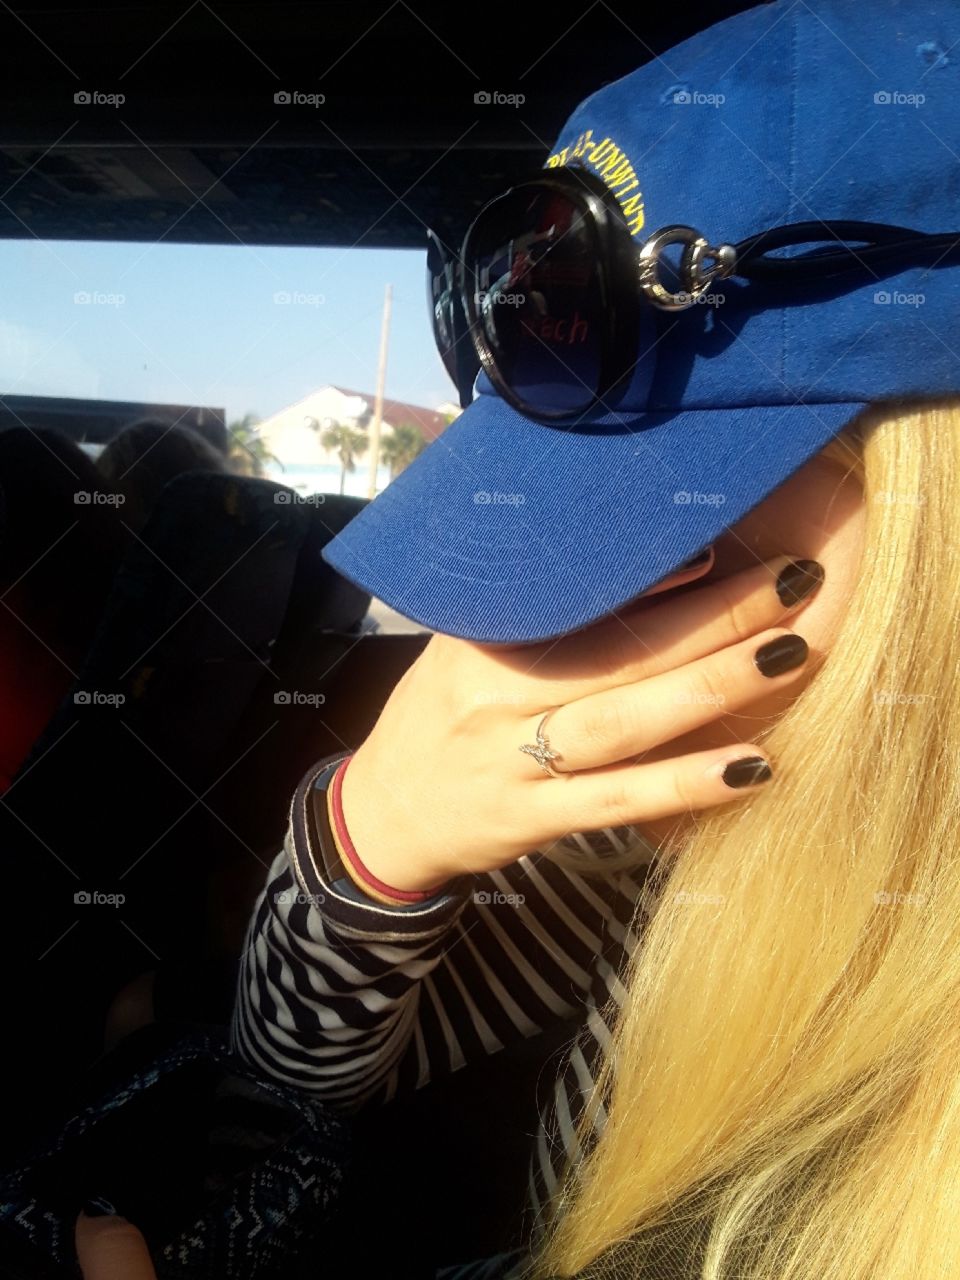 Sister wearing a black and white striped dress and a blue Virginia beach baseball hat, blocking the sun as well as hiding her face.